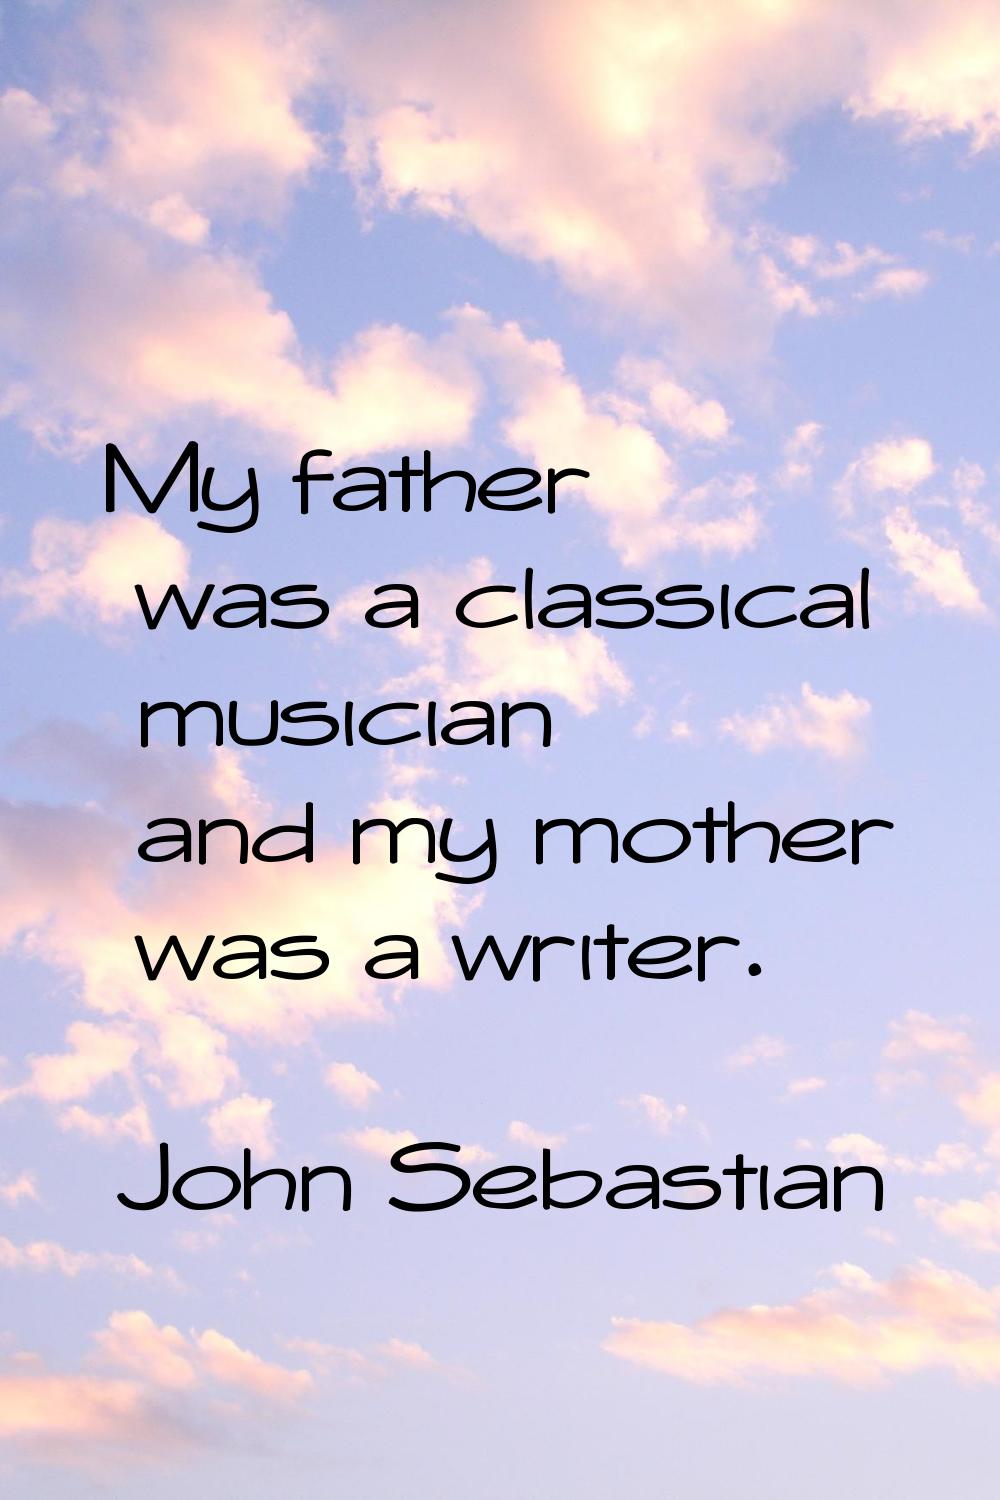 My father was a classical musician and my mother was a writer.